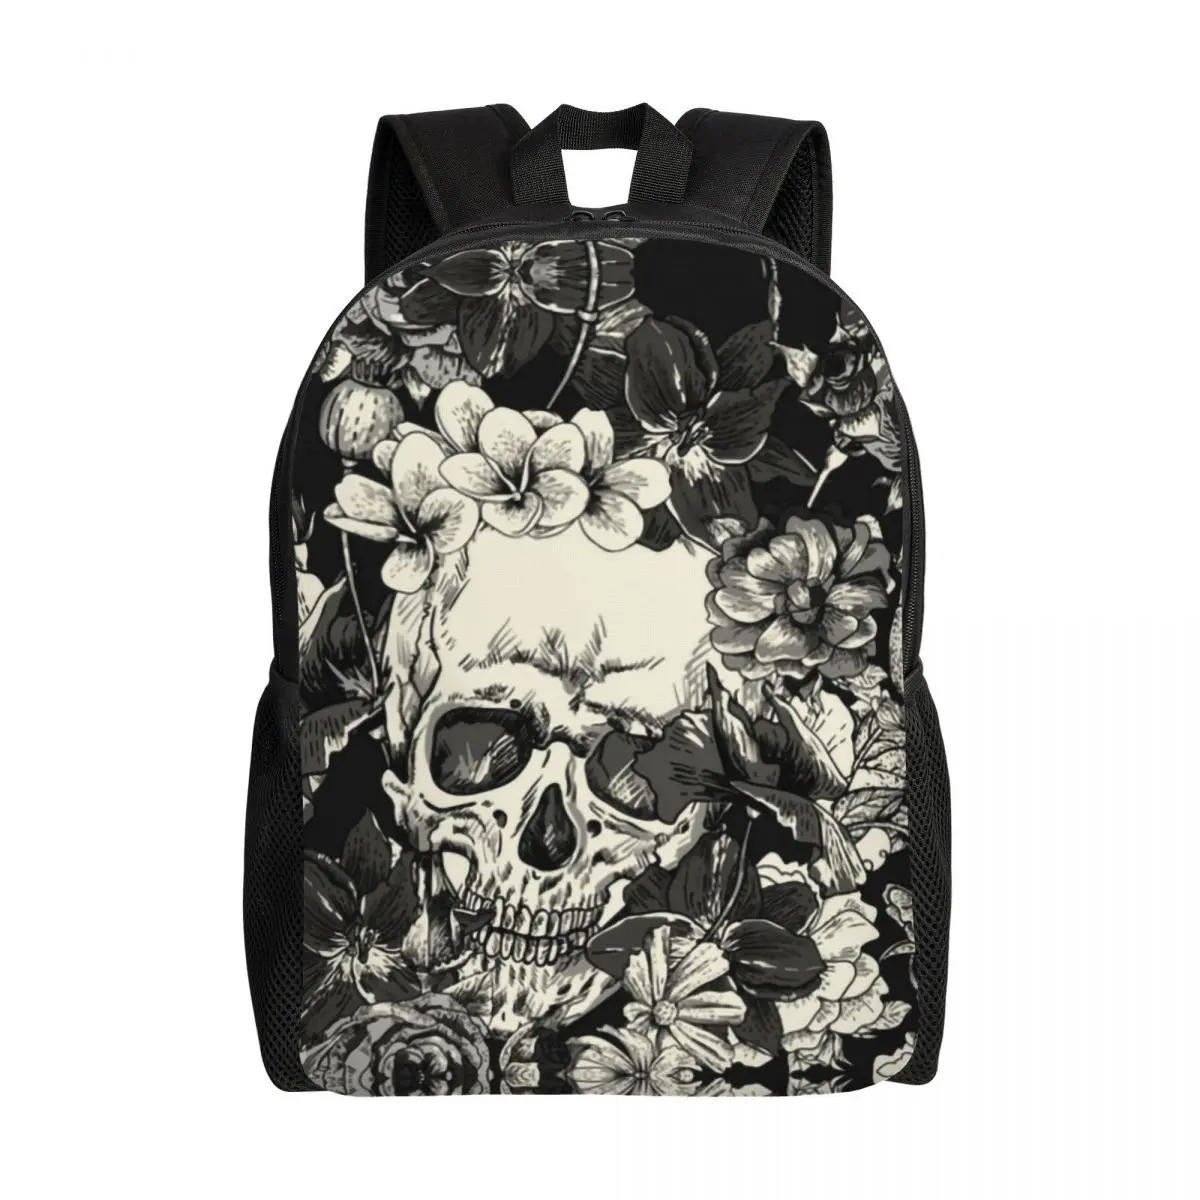 

Skulls And Roses Backpack for Women Men School College Students Bookbag Fits 15 Inch Laptop Gothic Moth Bags